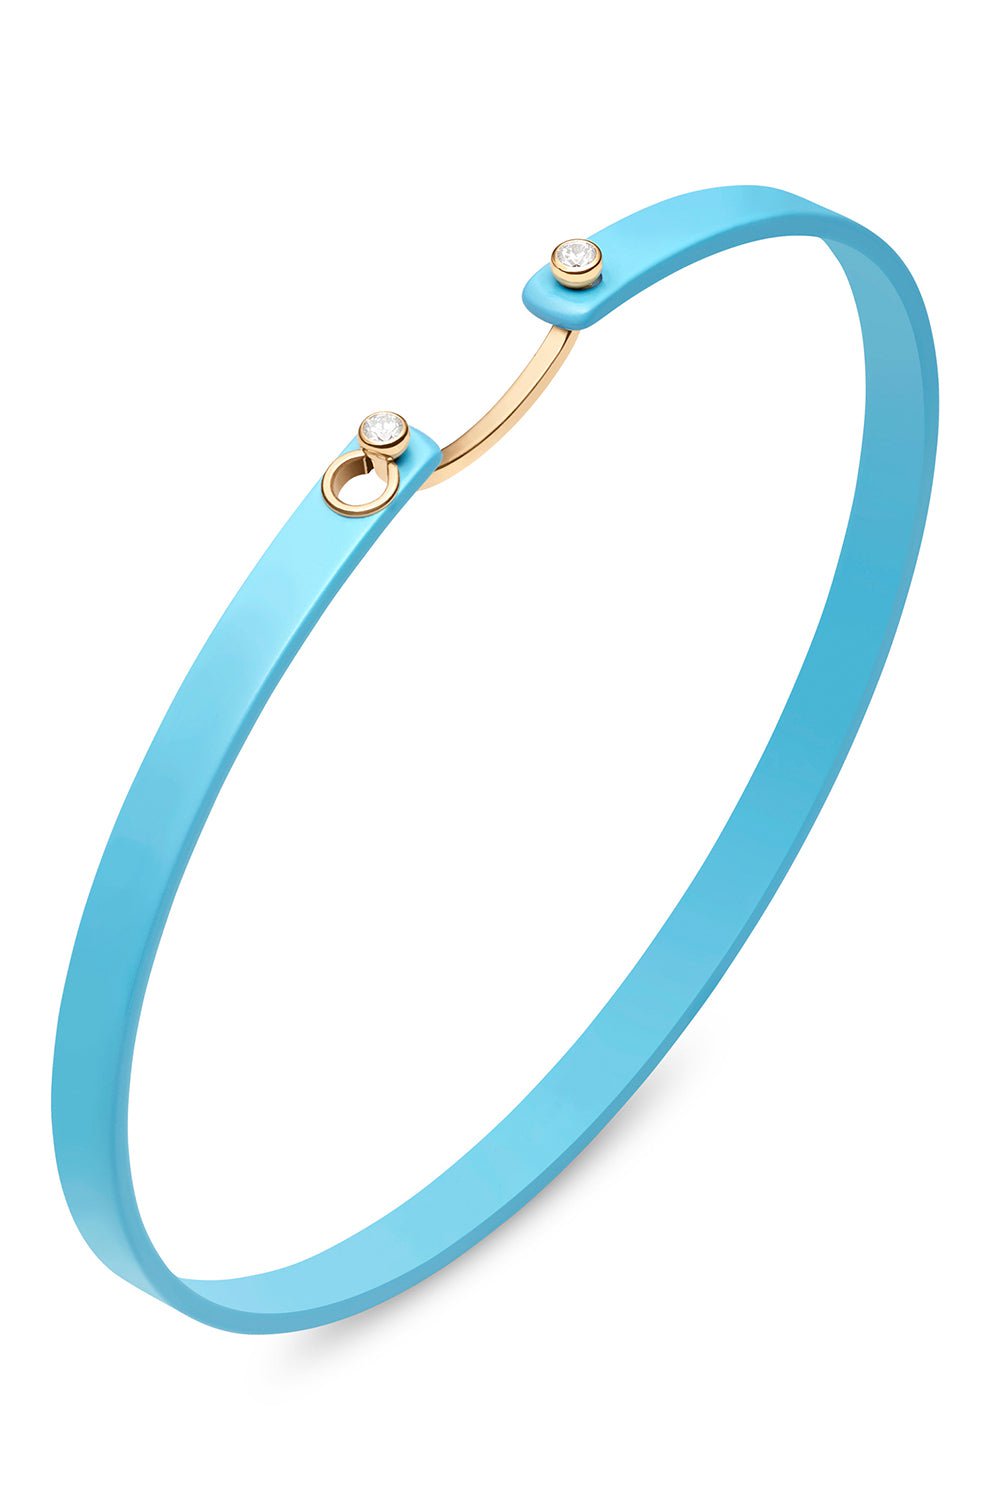 NOUVEL HERITAGE-Afternoon Swim Bangle-YELLOW GOLD